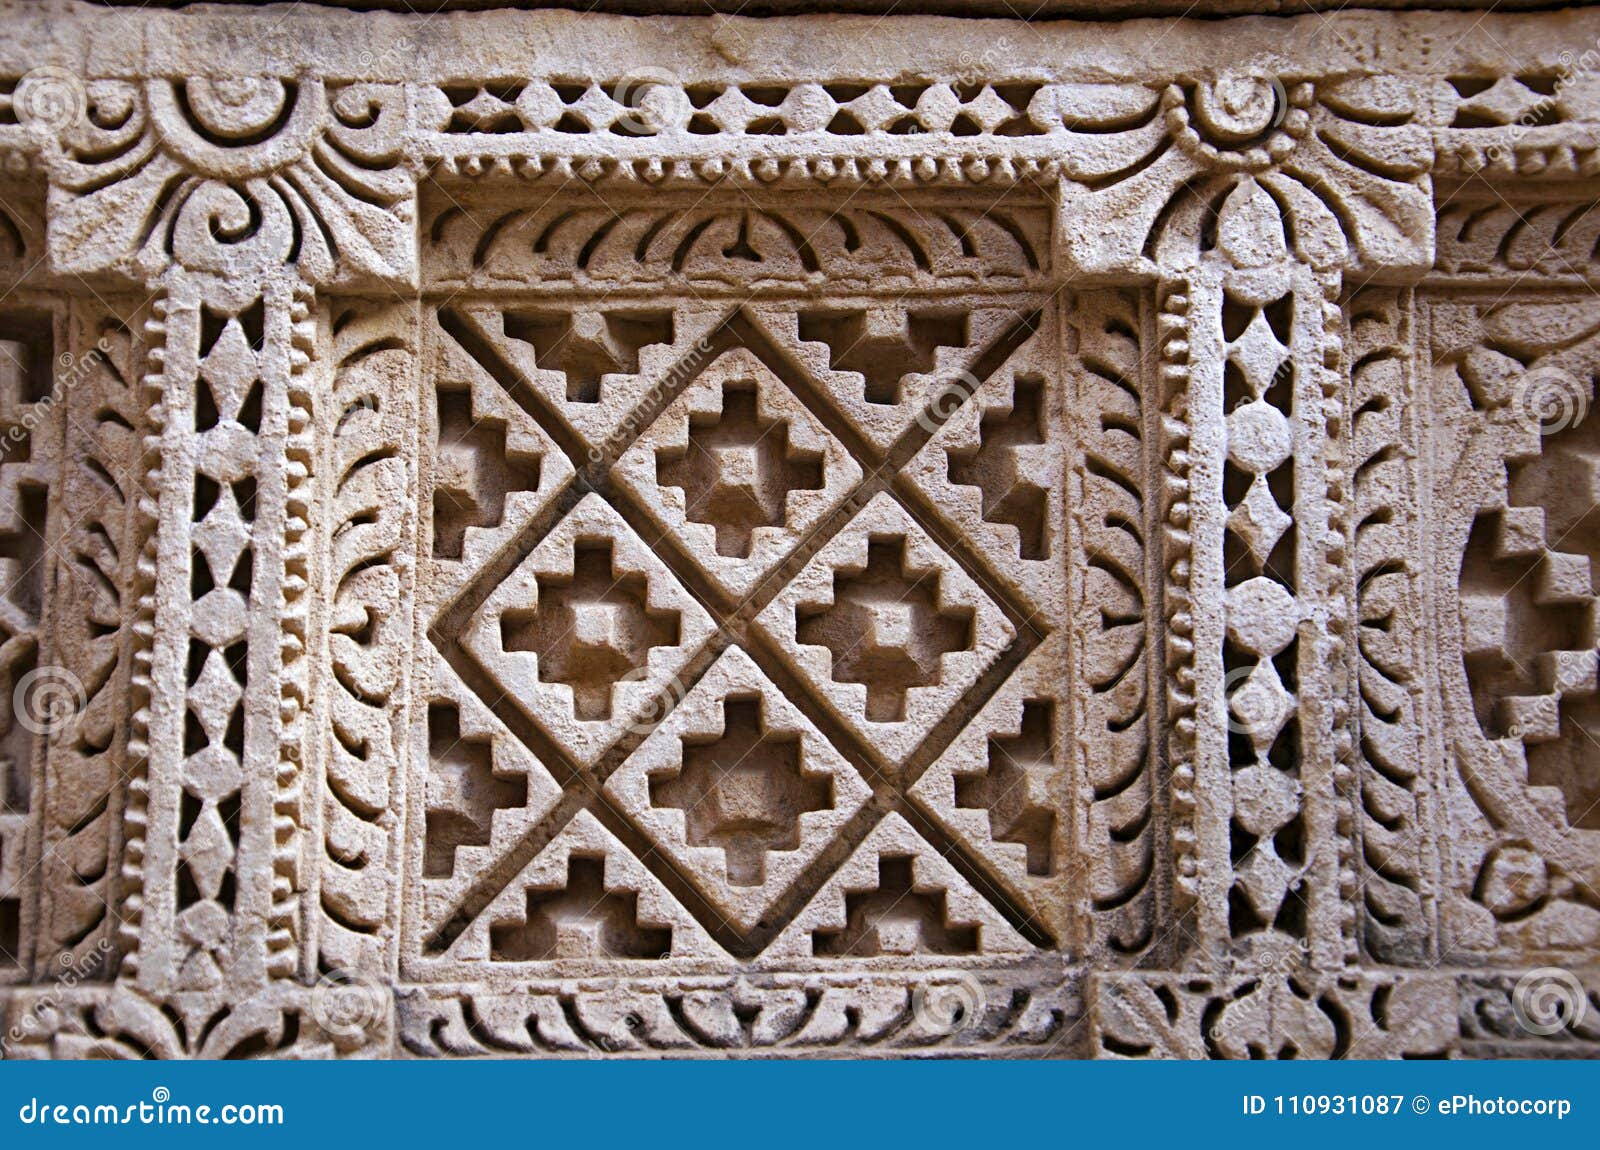 carved patola double ikat pattern on the inner wall of rani ki vav, an intricately constructed stepwell on the banks of saraswat